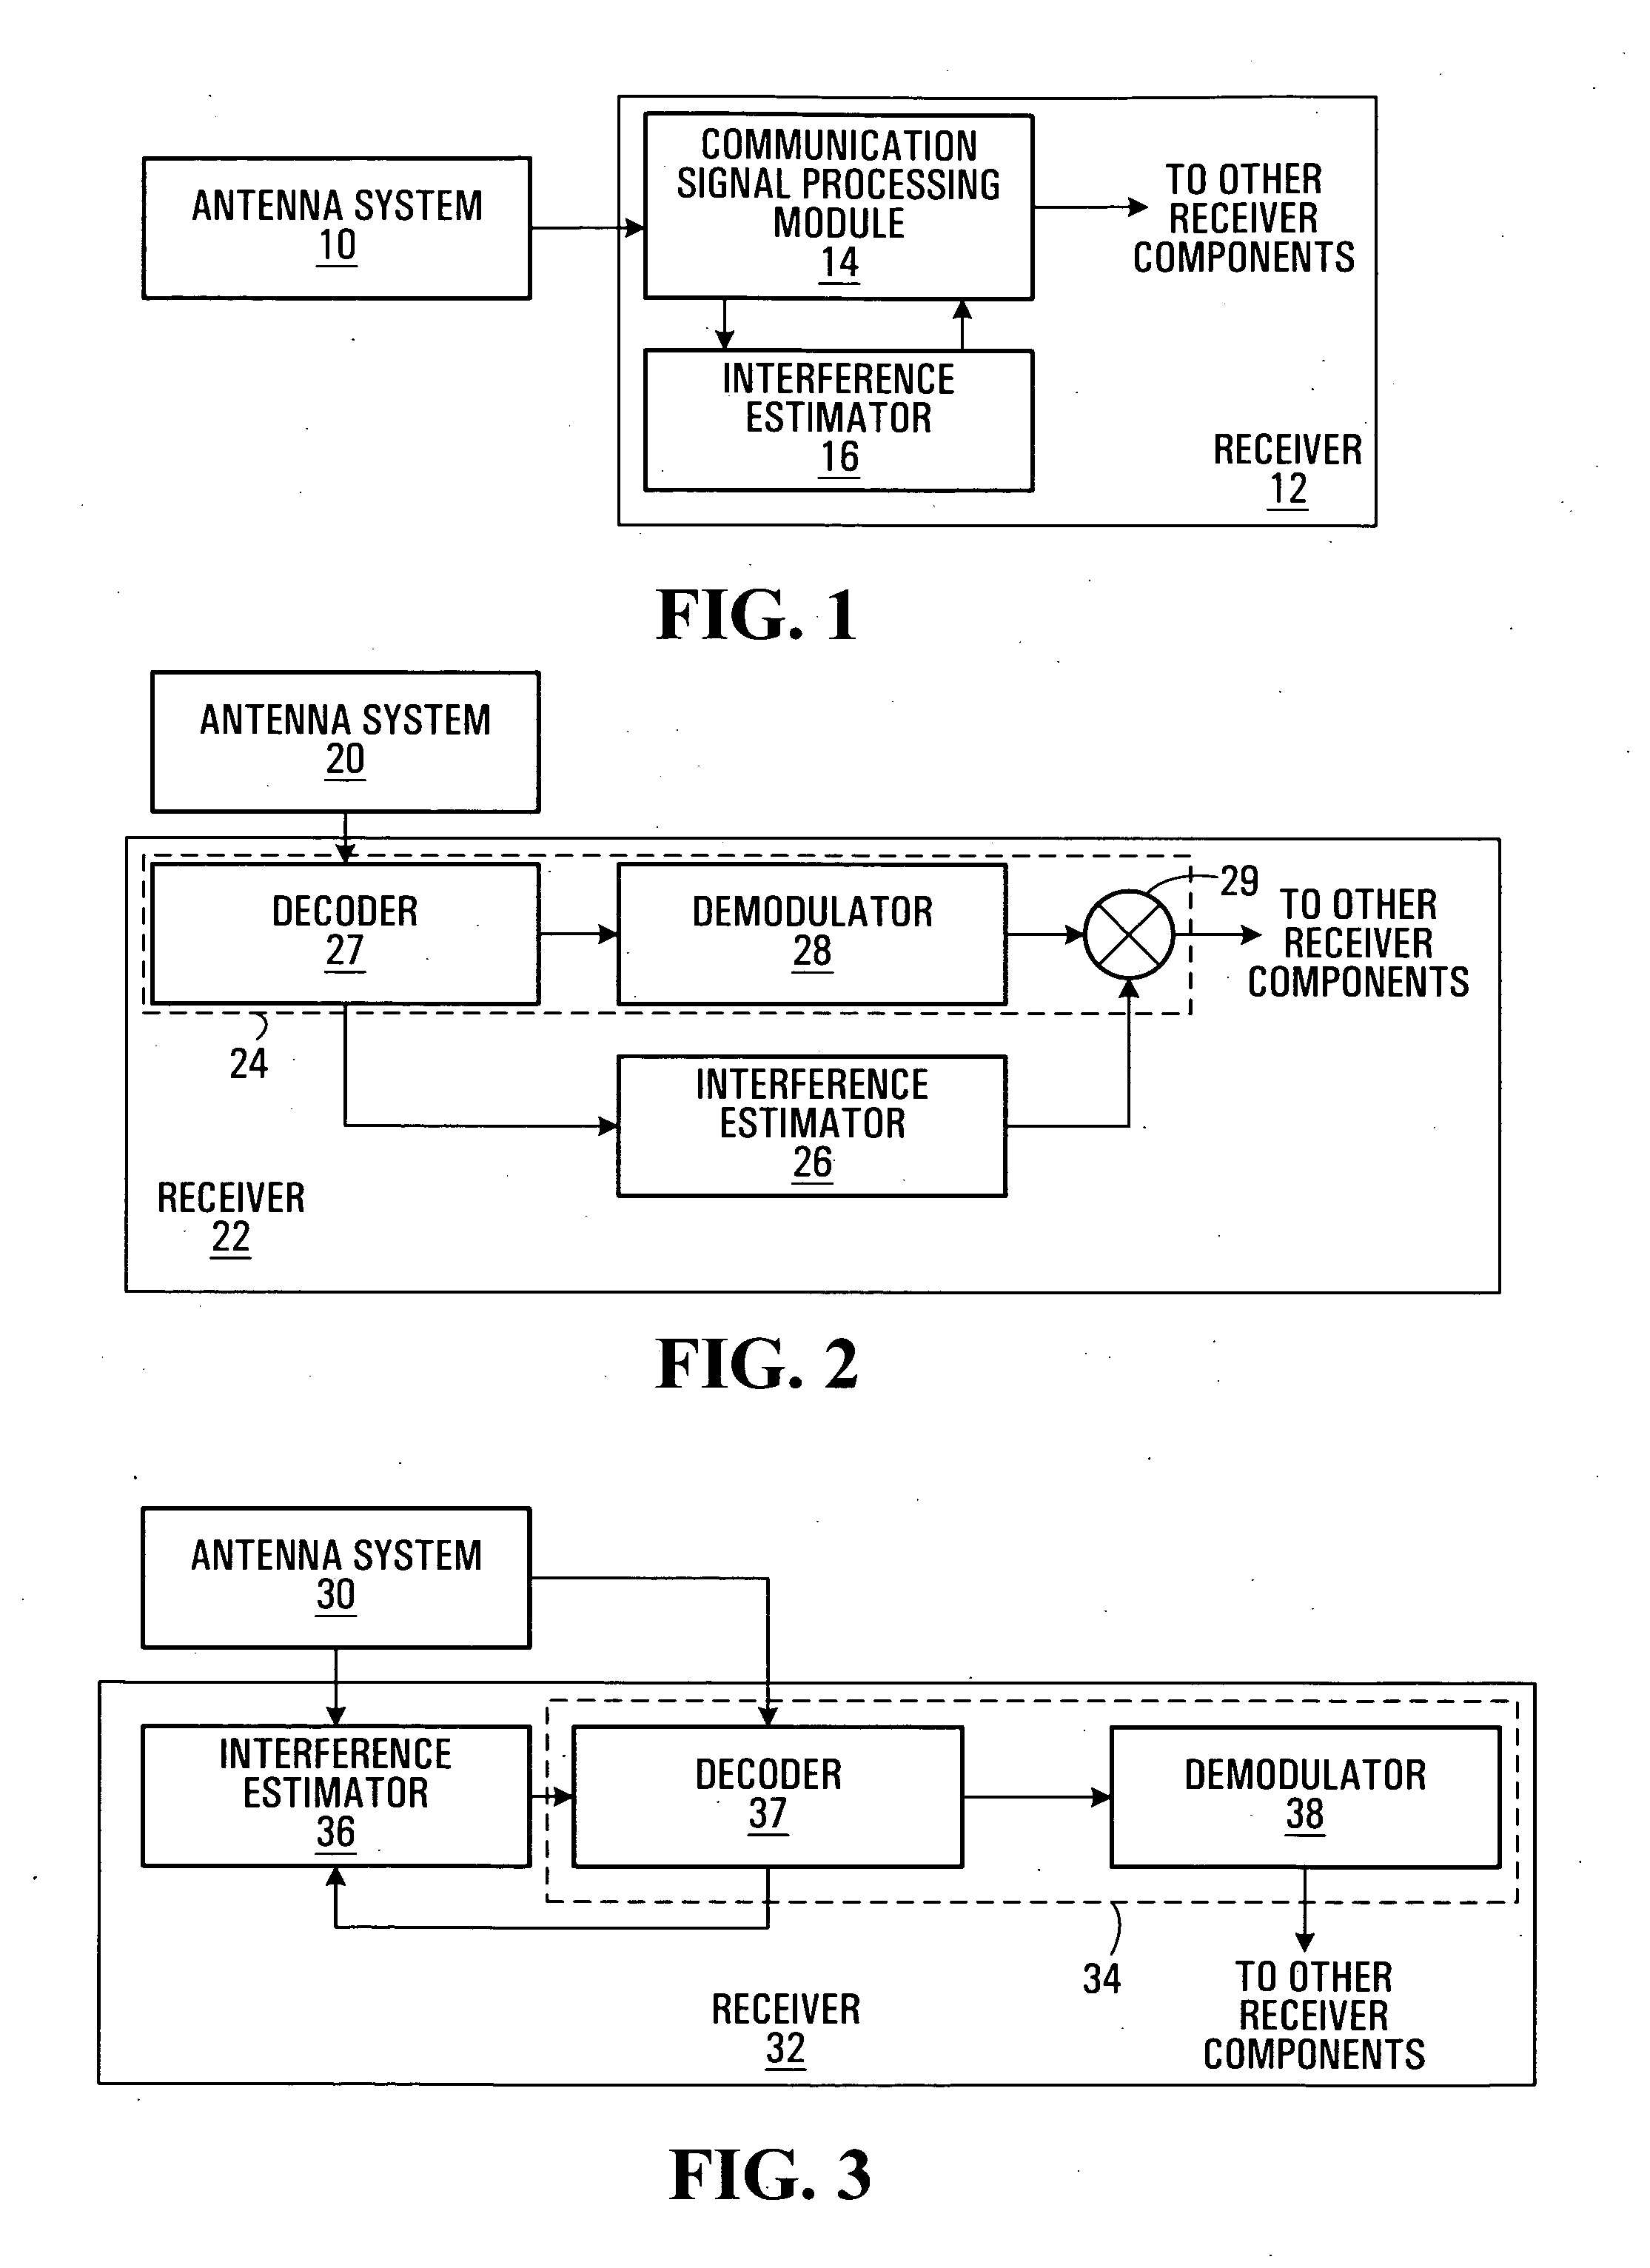 Interference-weighted communication signal processing systems and methods